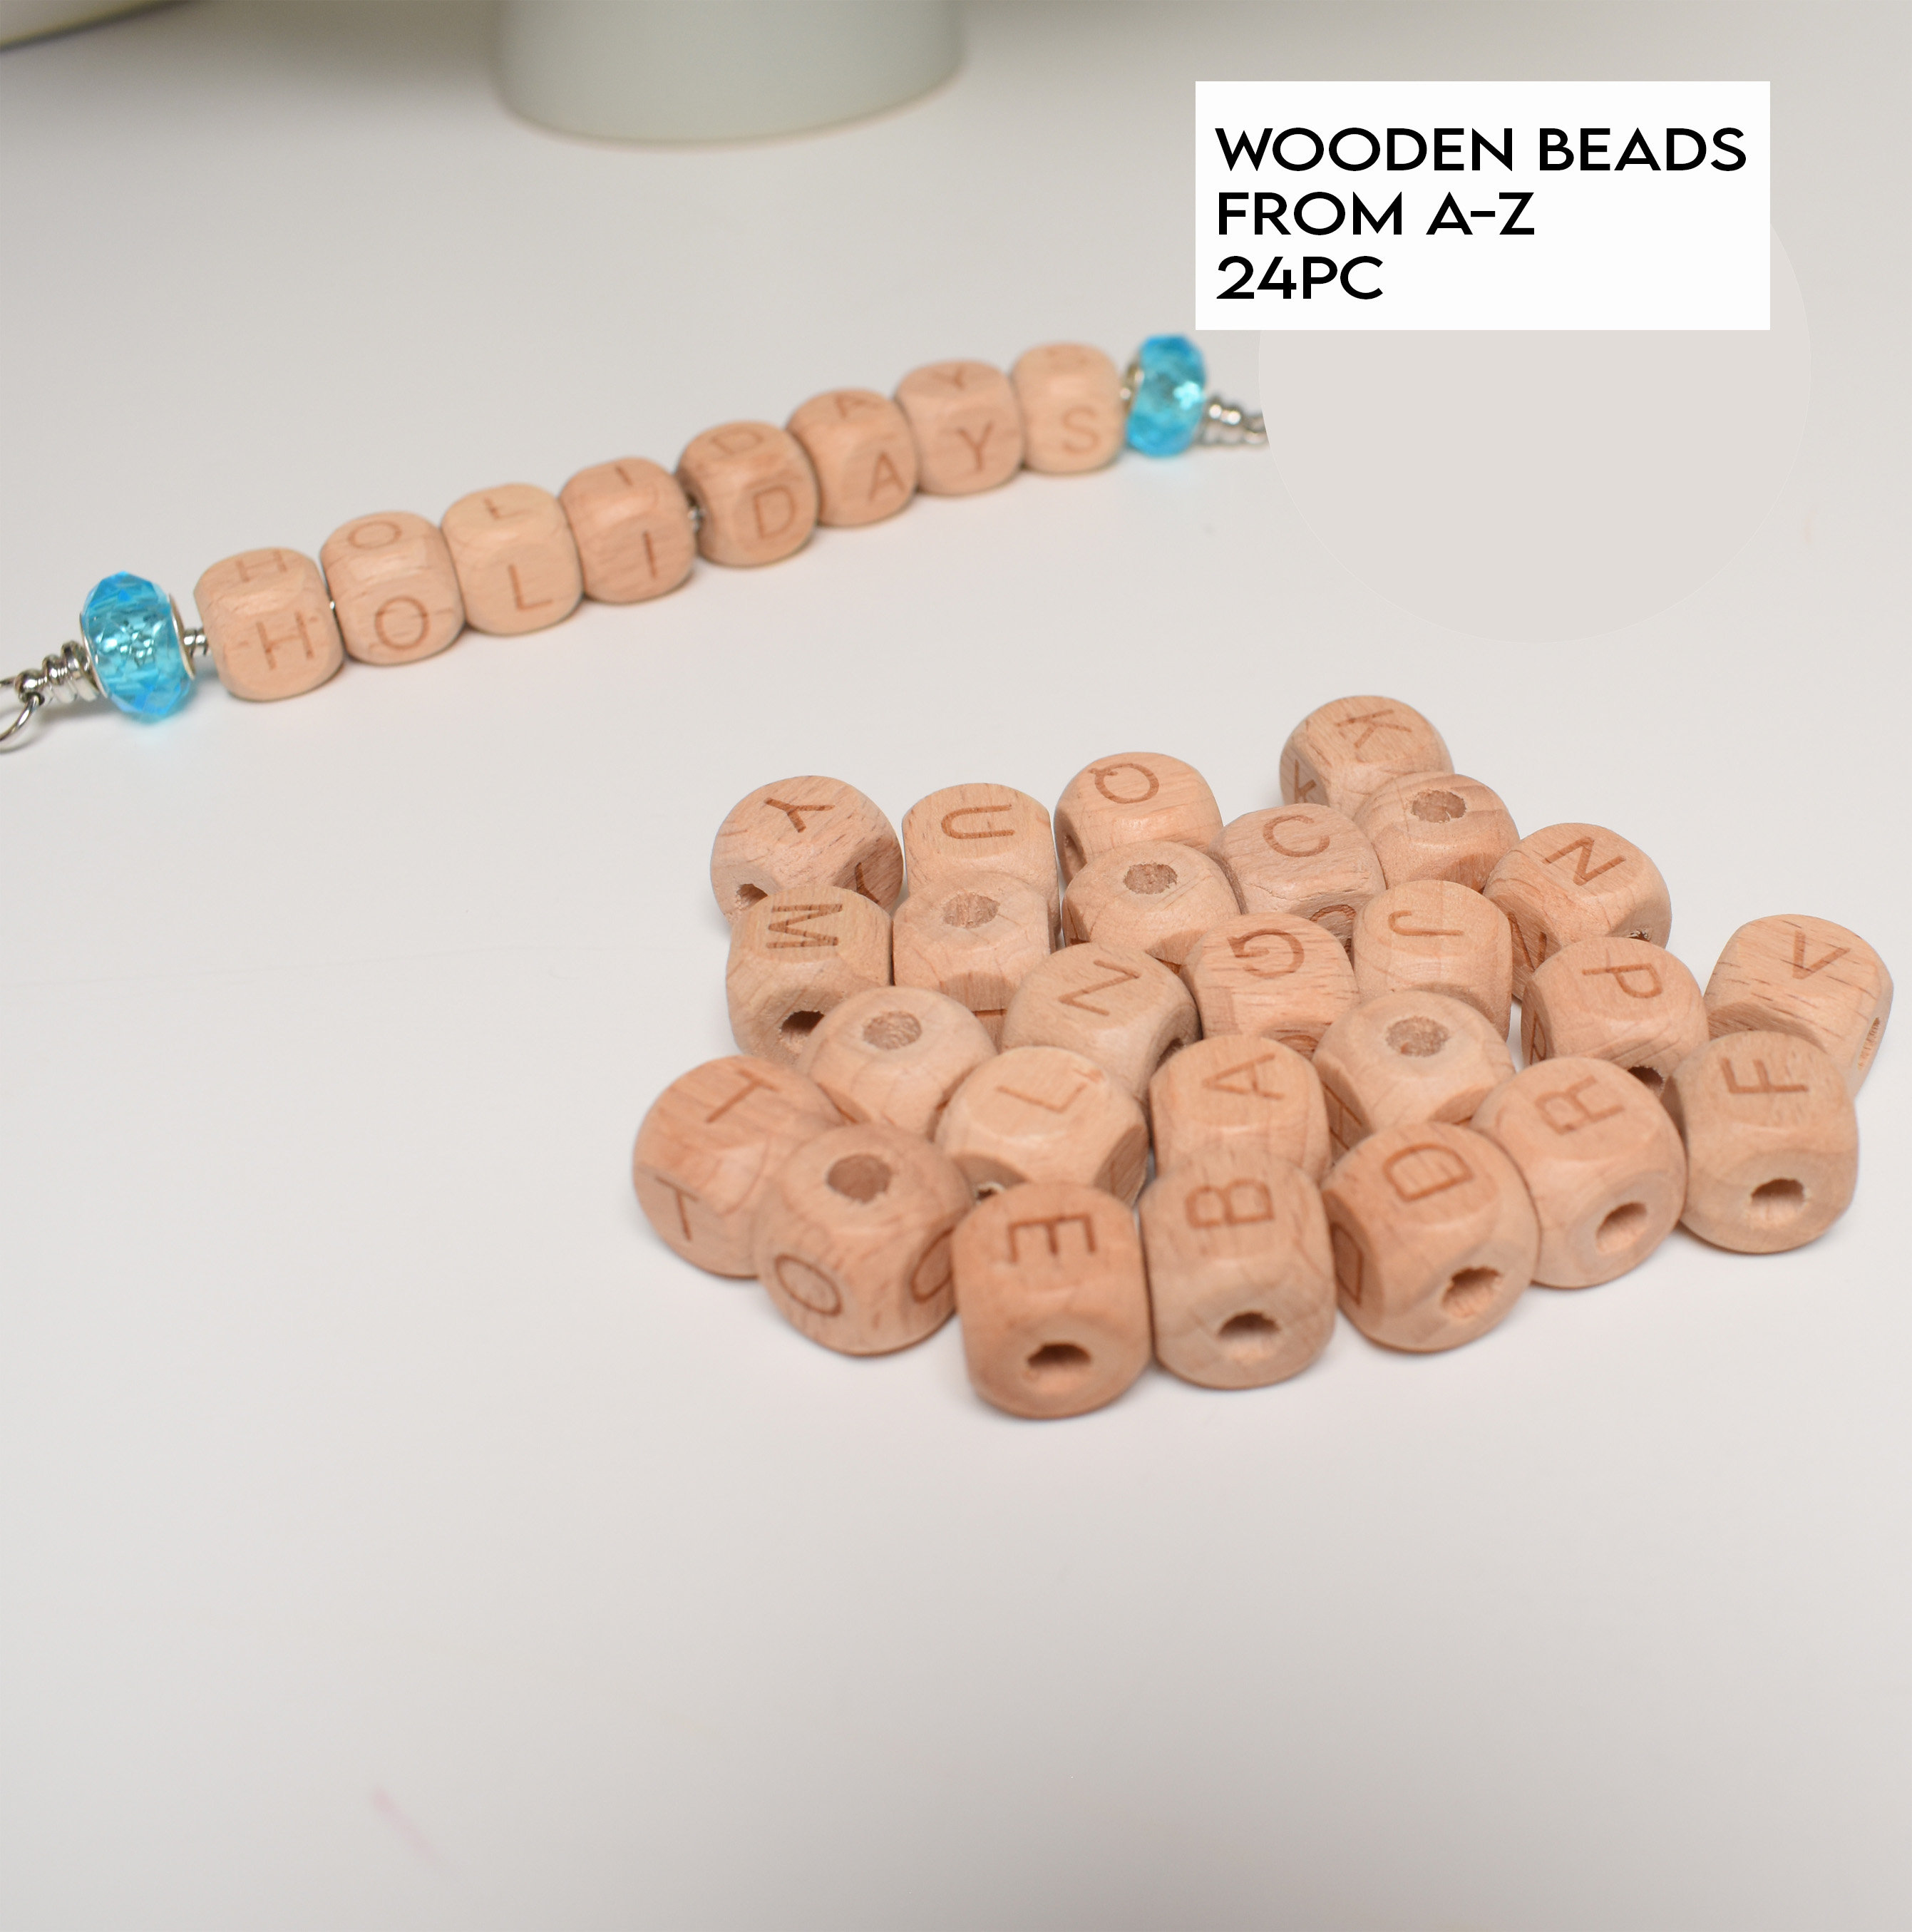  52Pcs Alphabet Wooden Beads 12mm Square Wooden Beads A-Z Wooden  Alphabet Beads Letter Beads Loose Beads for Jewelry Making and DIY Crafts :  Arts, Crafts & Sewing